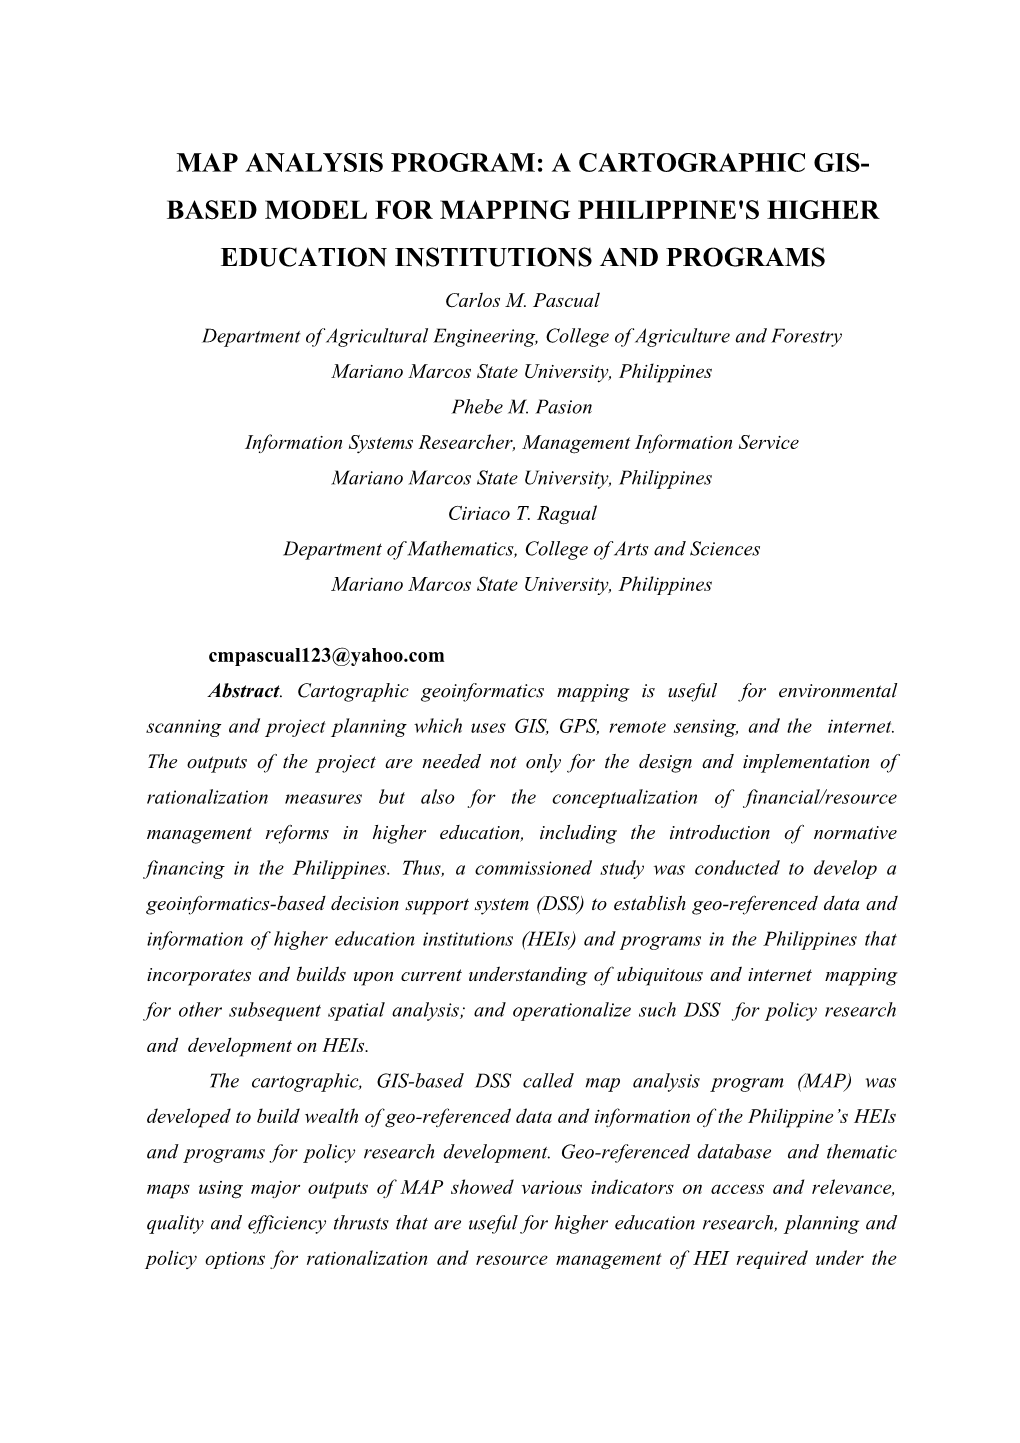 Use of GIS and GPS Mapping for Higher Education Institutions in the Philippines